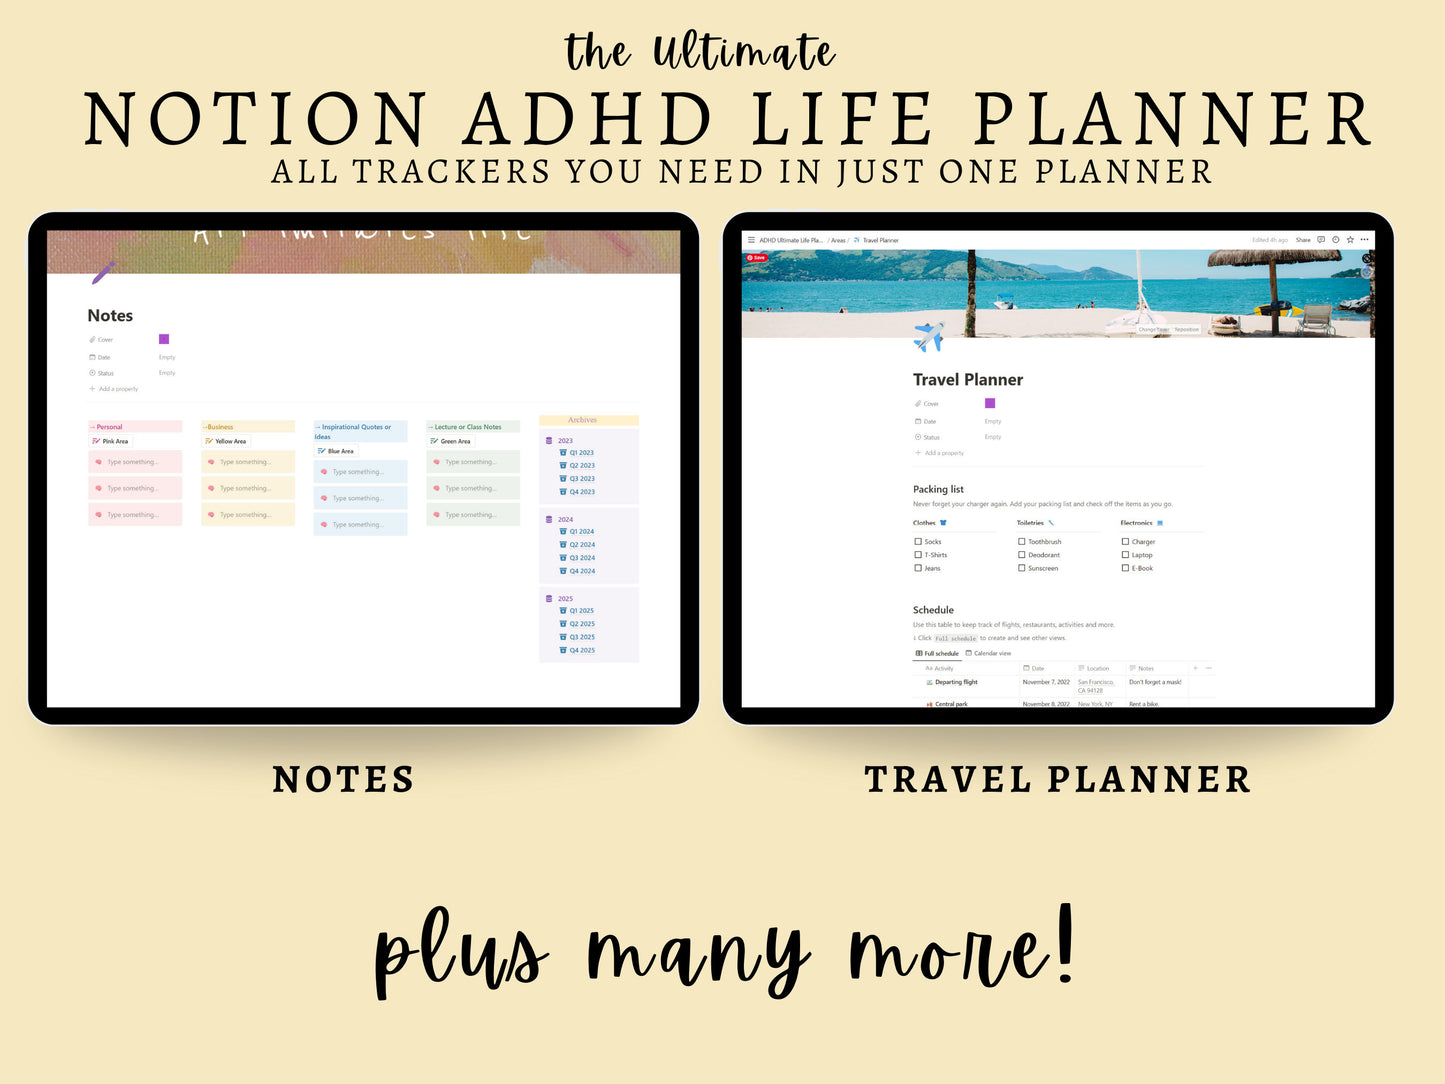 ADHD Notion Life Planner | ADHD Notion Template, ADHD Notion, Notion Dashboard